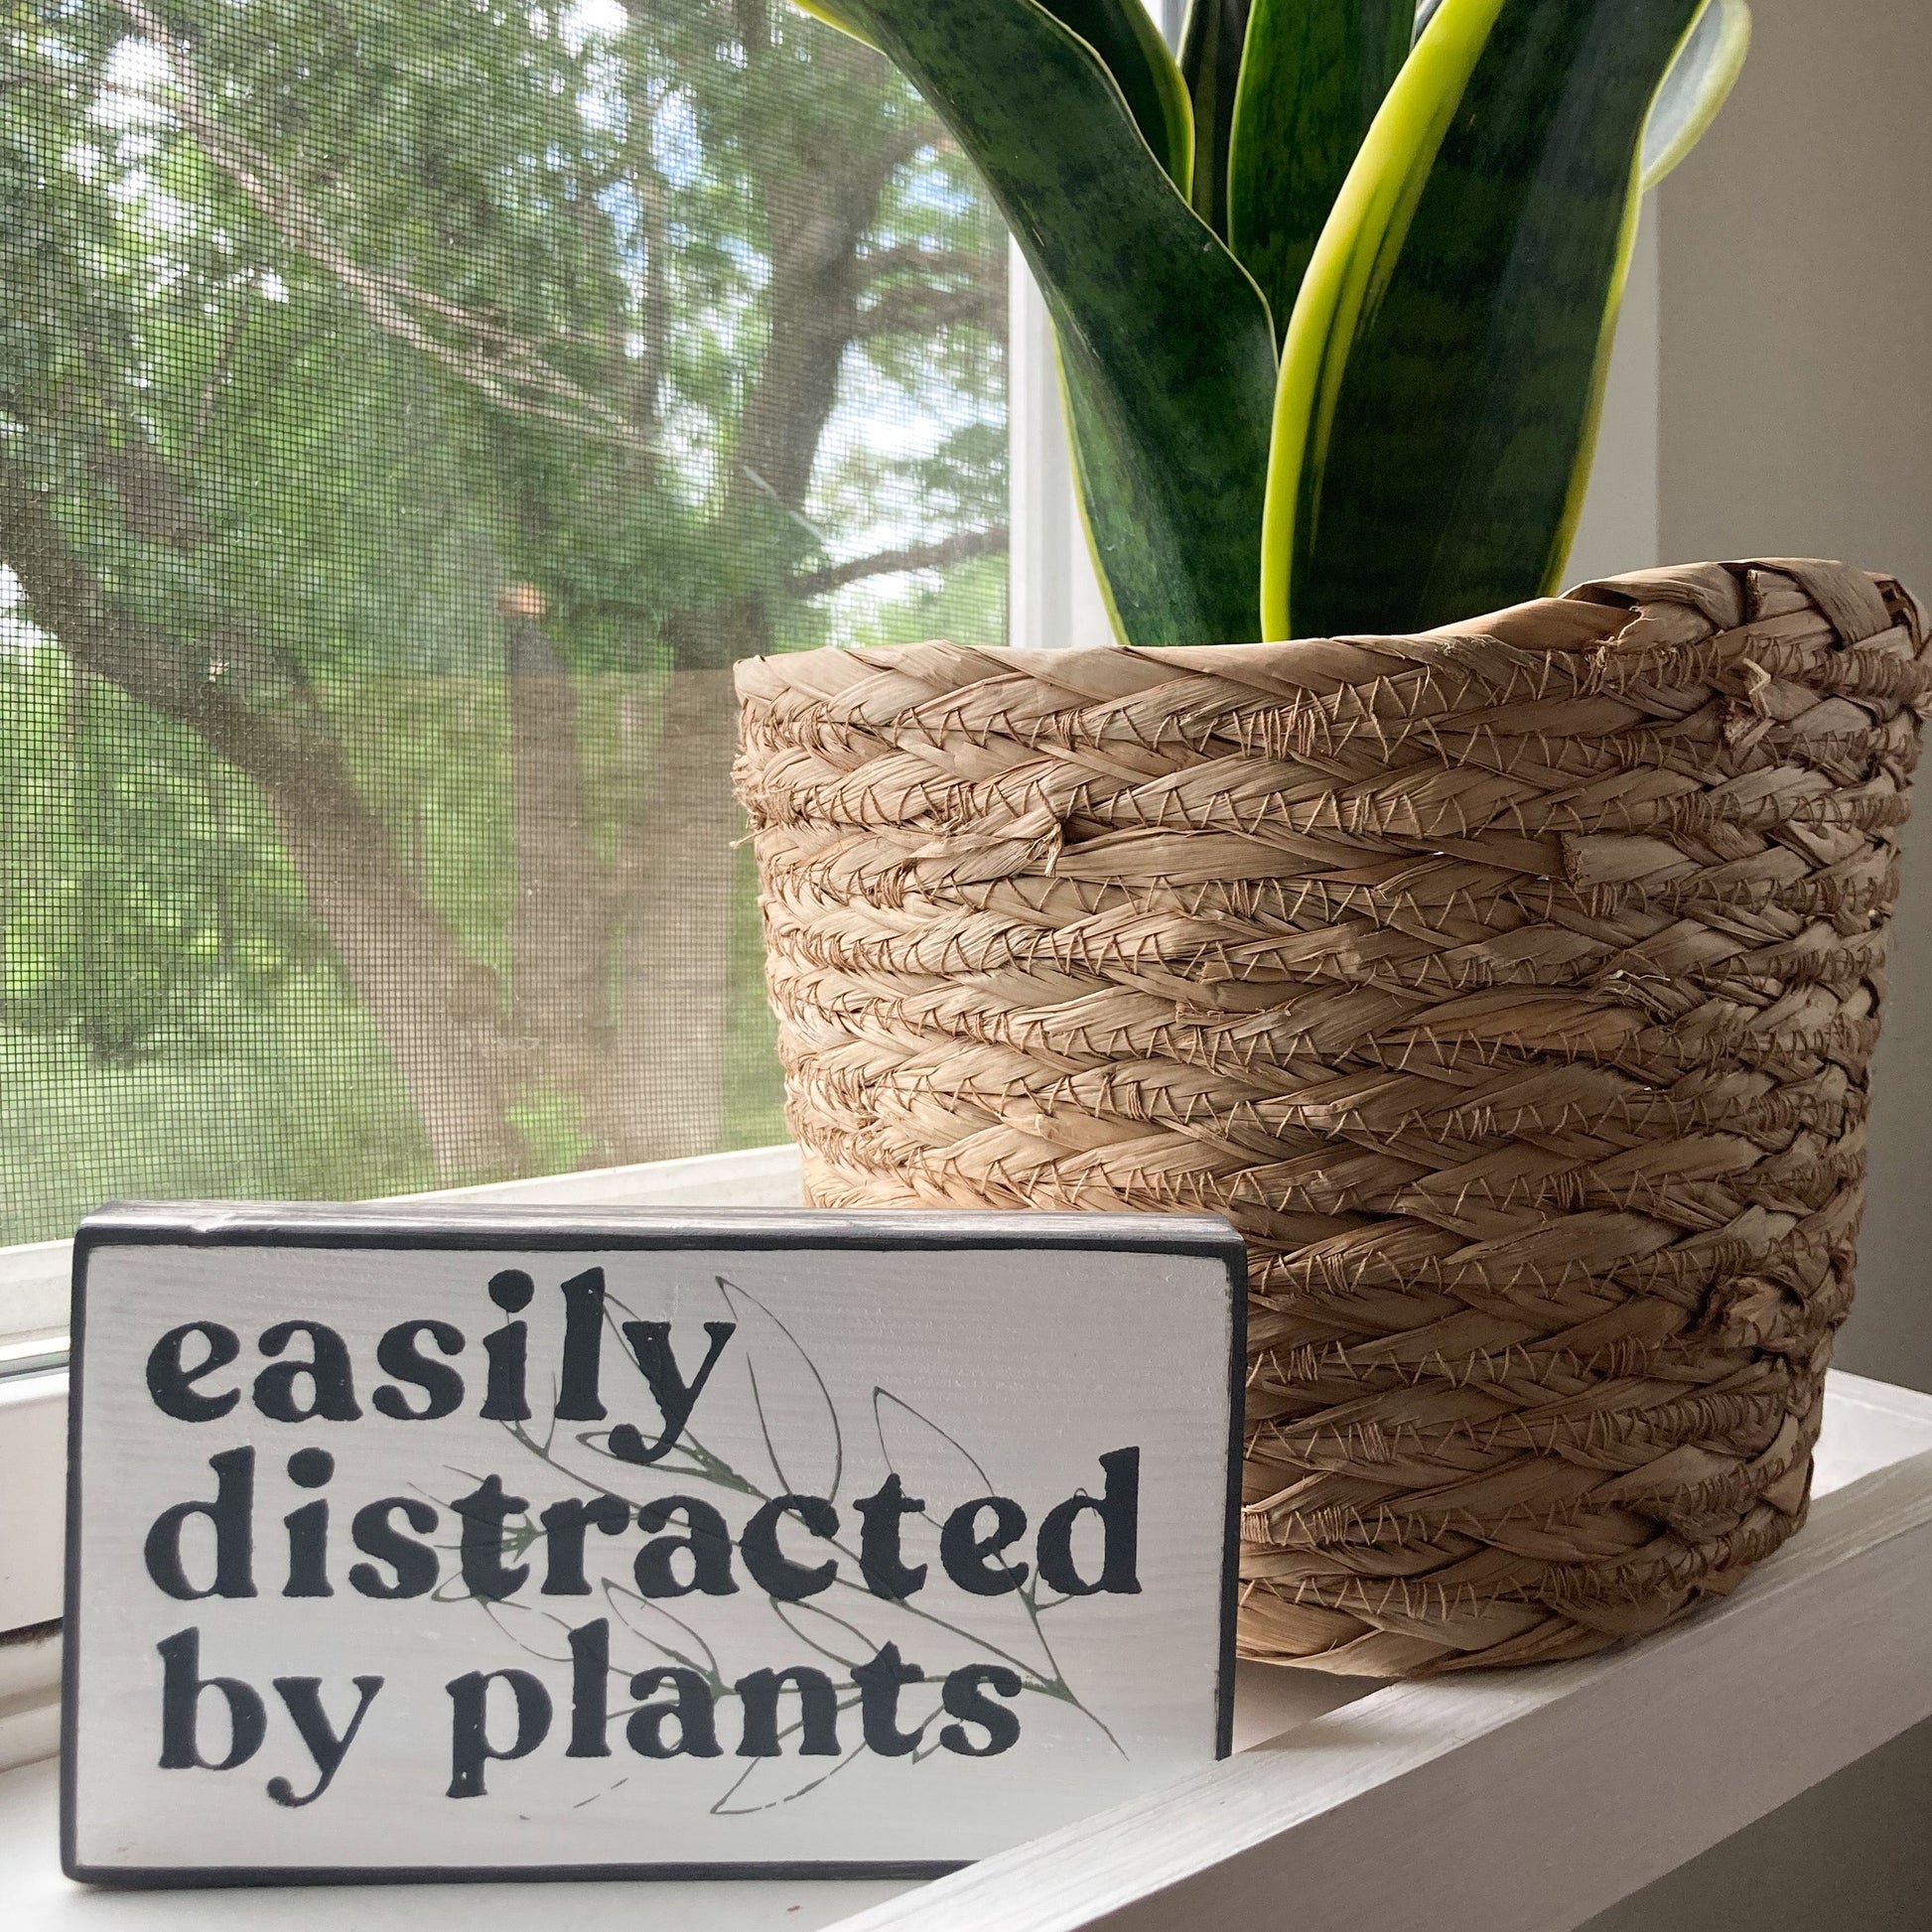 Easily distrated by plants wood sign painted white with black wording and leaf displayed on a window shelf next to a plant 3.5 inches by 6 inches